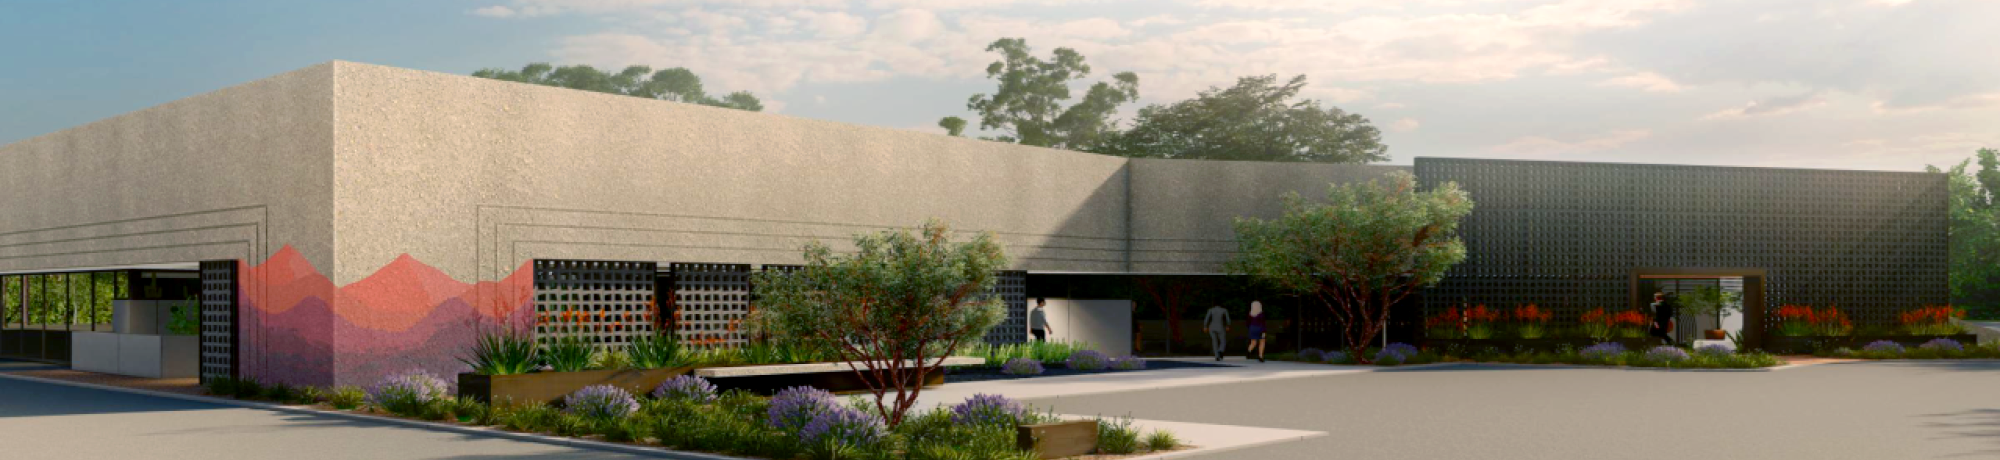 Rendering of the exterior of the Janice K. Hobbs Veterinary Medical Center